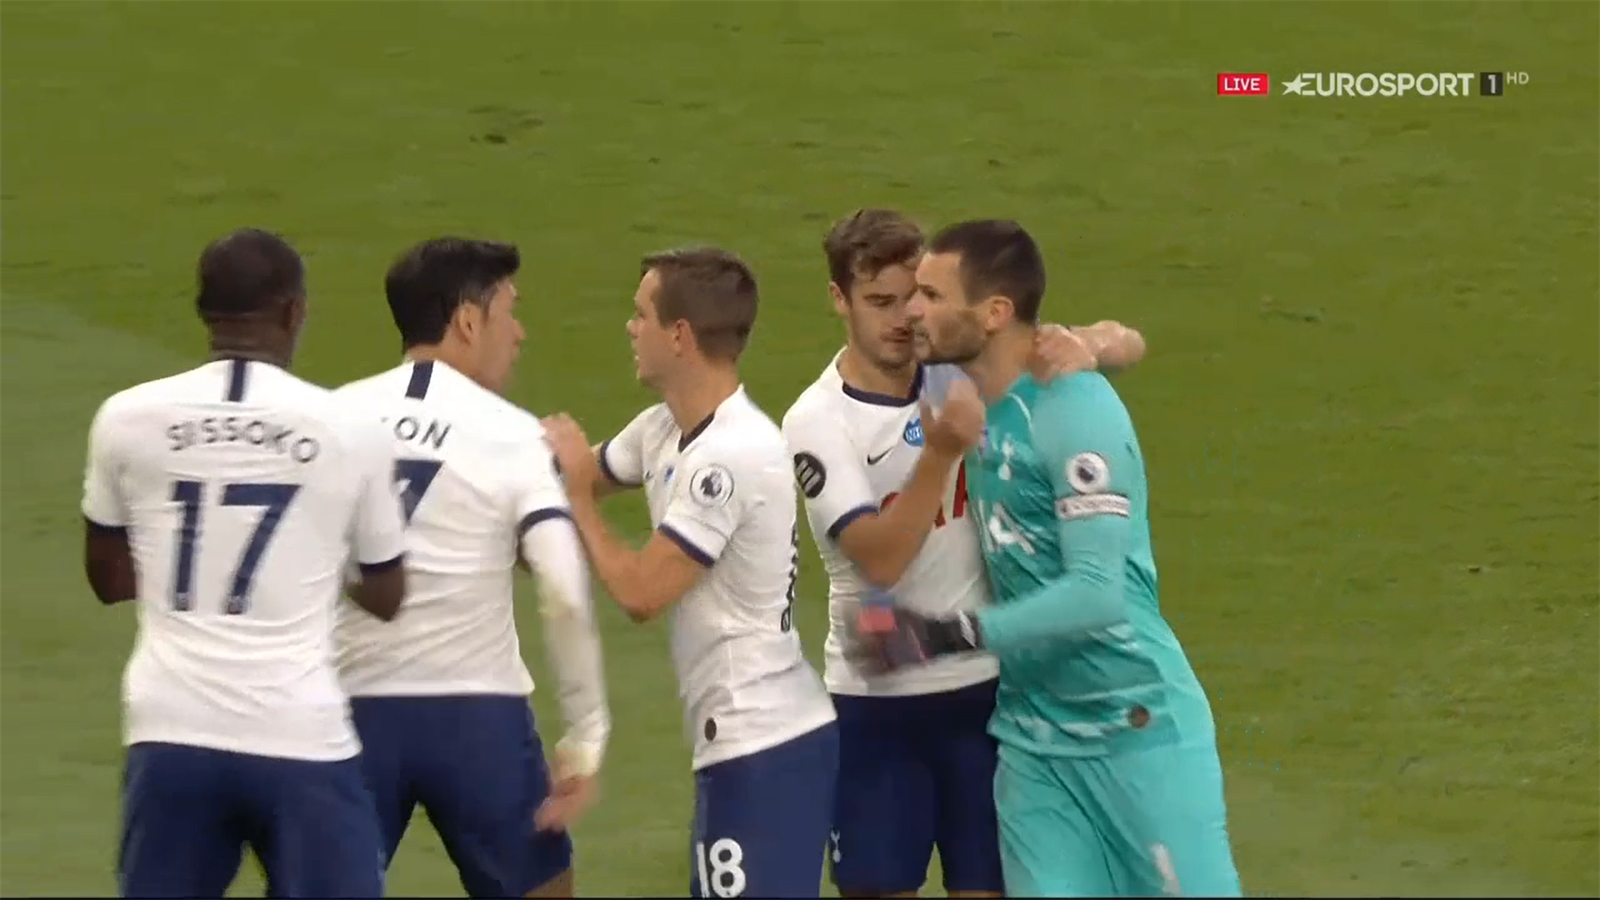 Tottenham Wins by a Margin against Everton with the Captain in a Mess